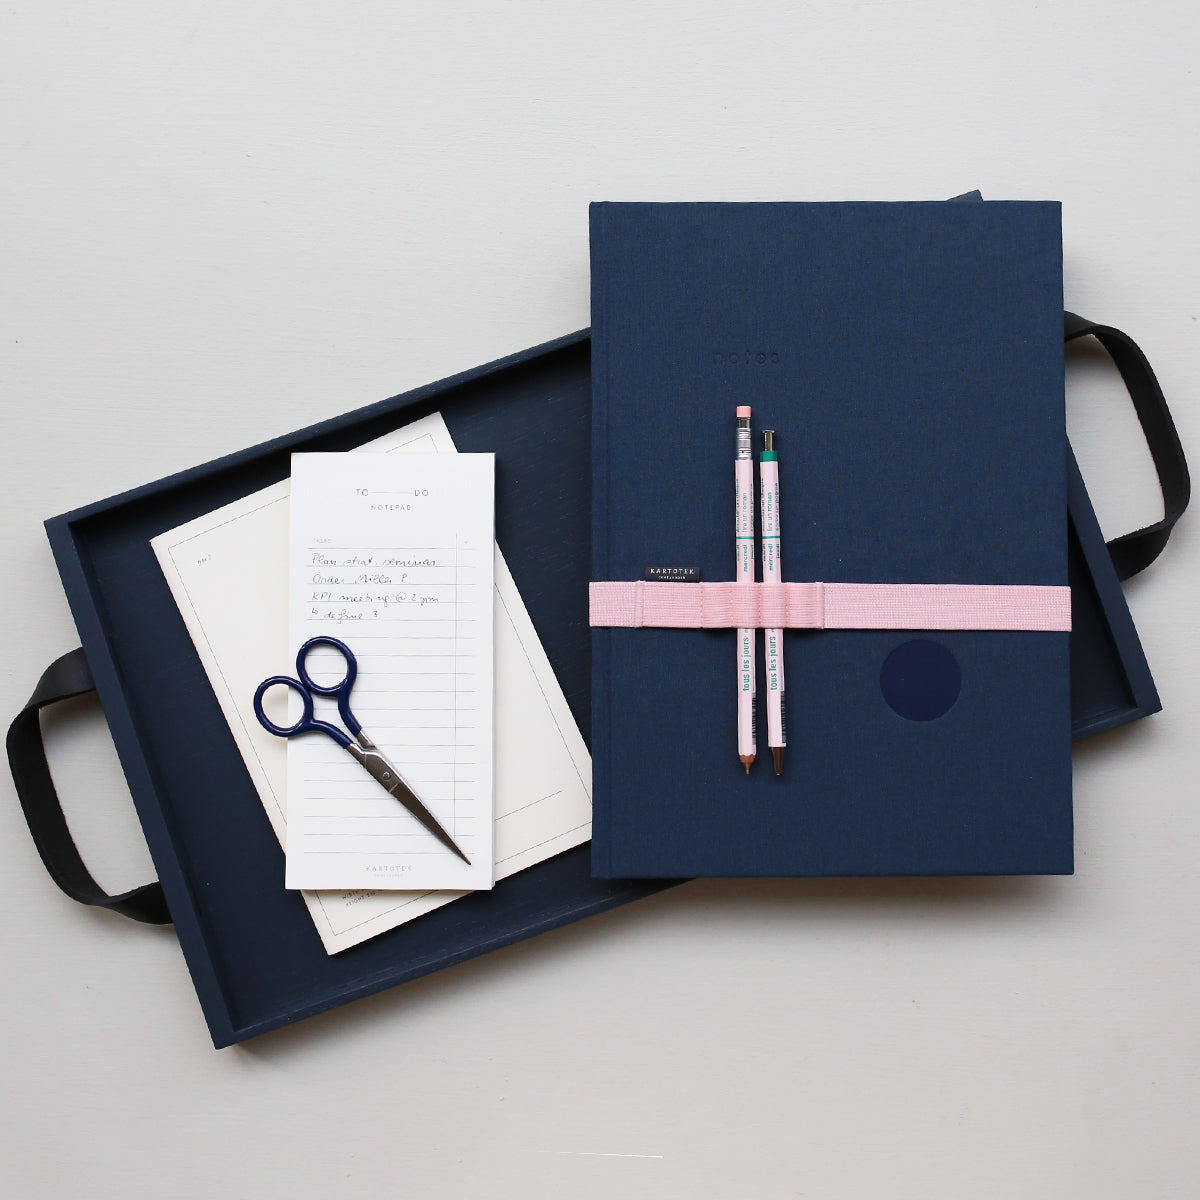 HARDCOVER NOTEBOOK A4 // DUSTY BLUE